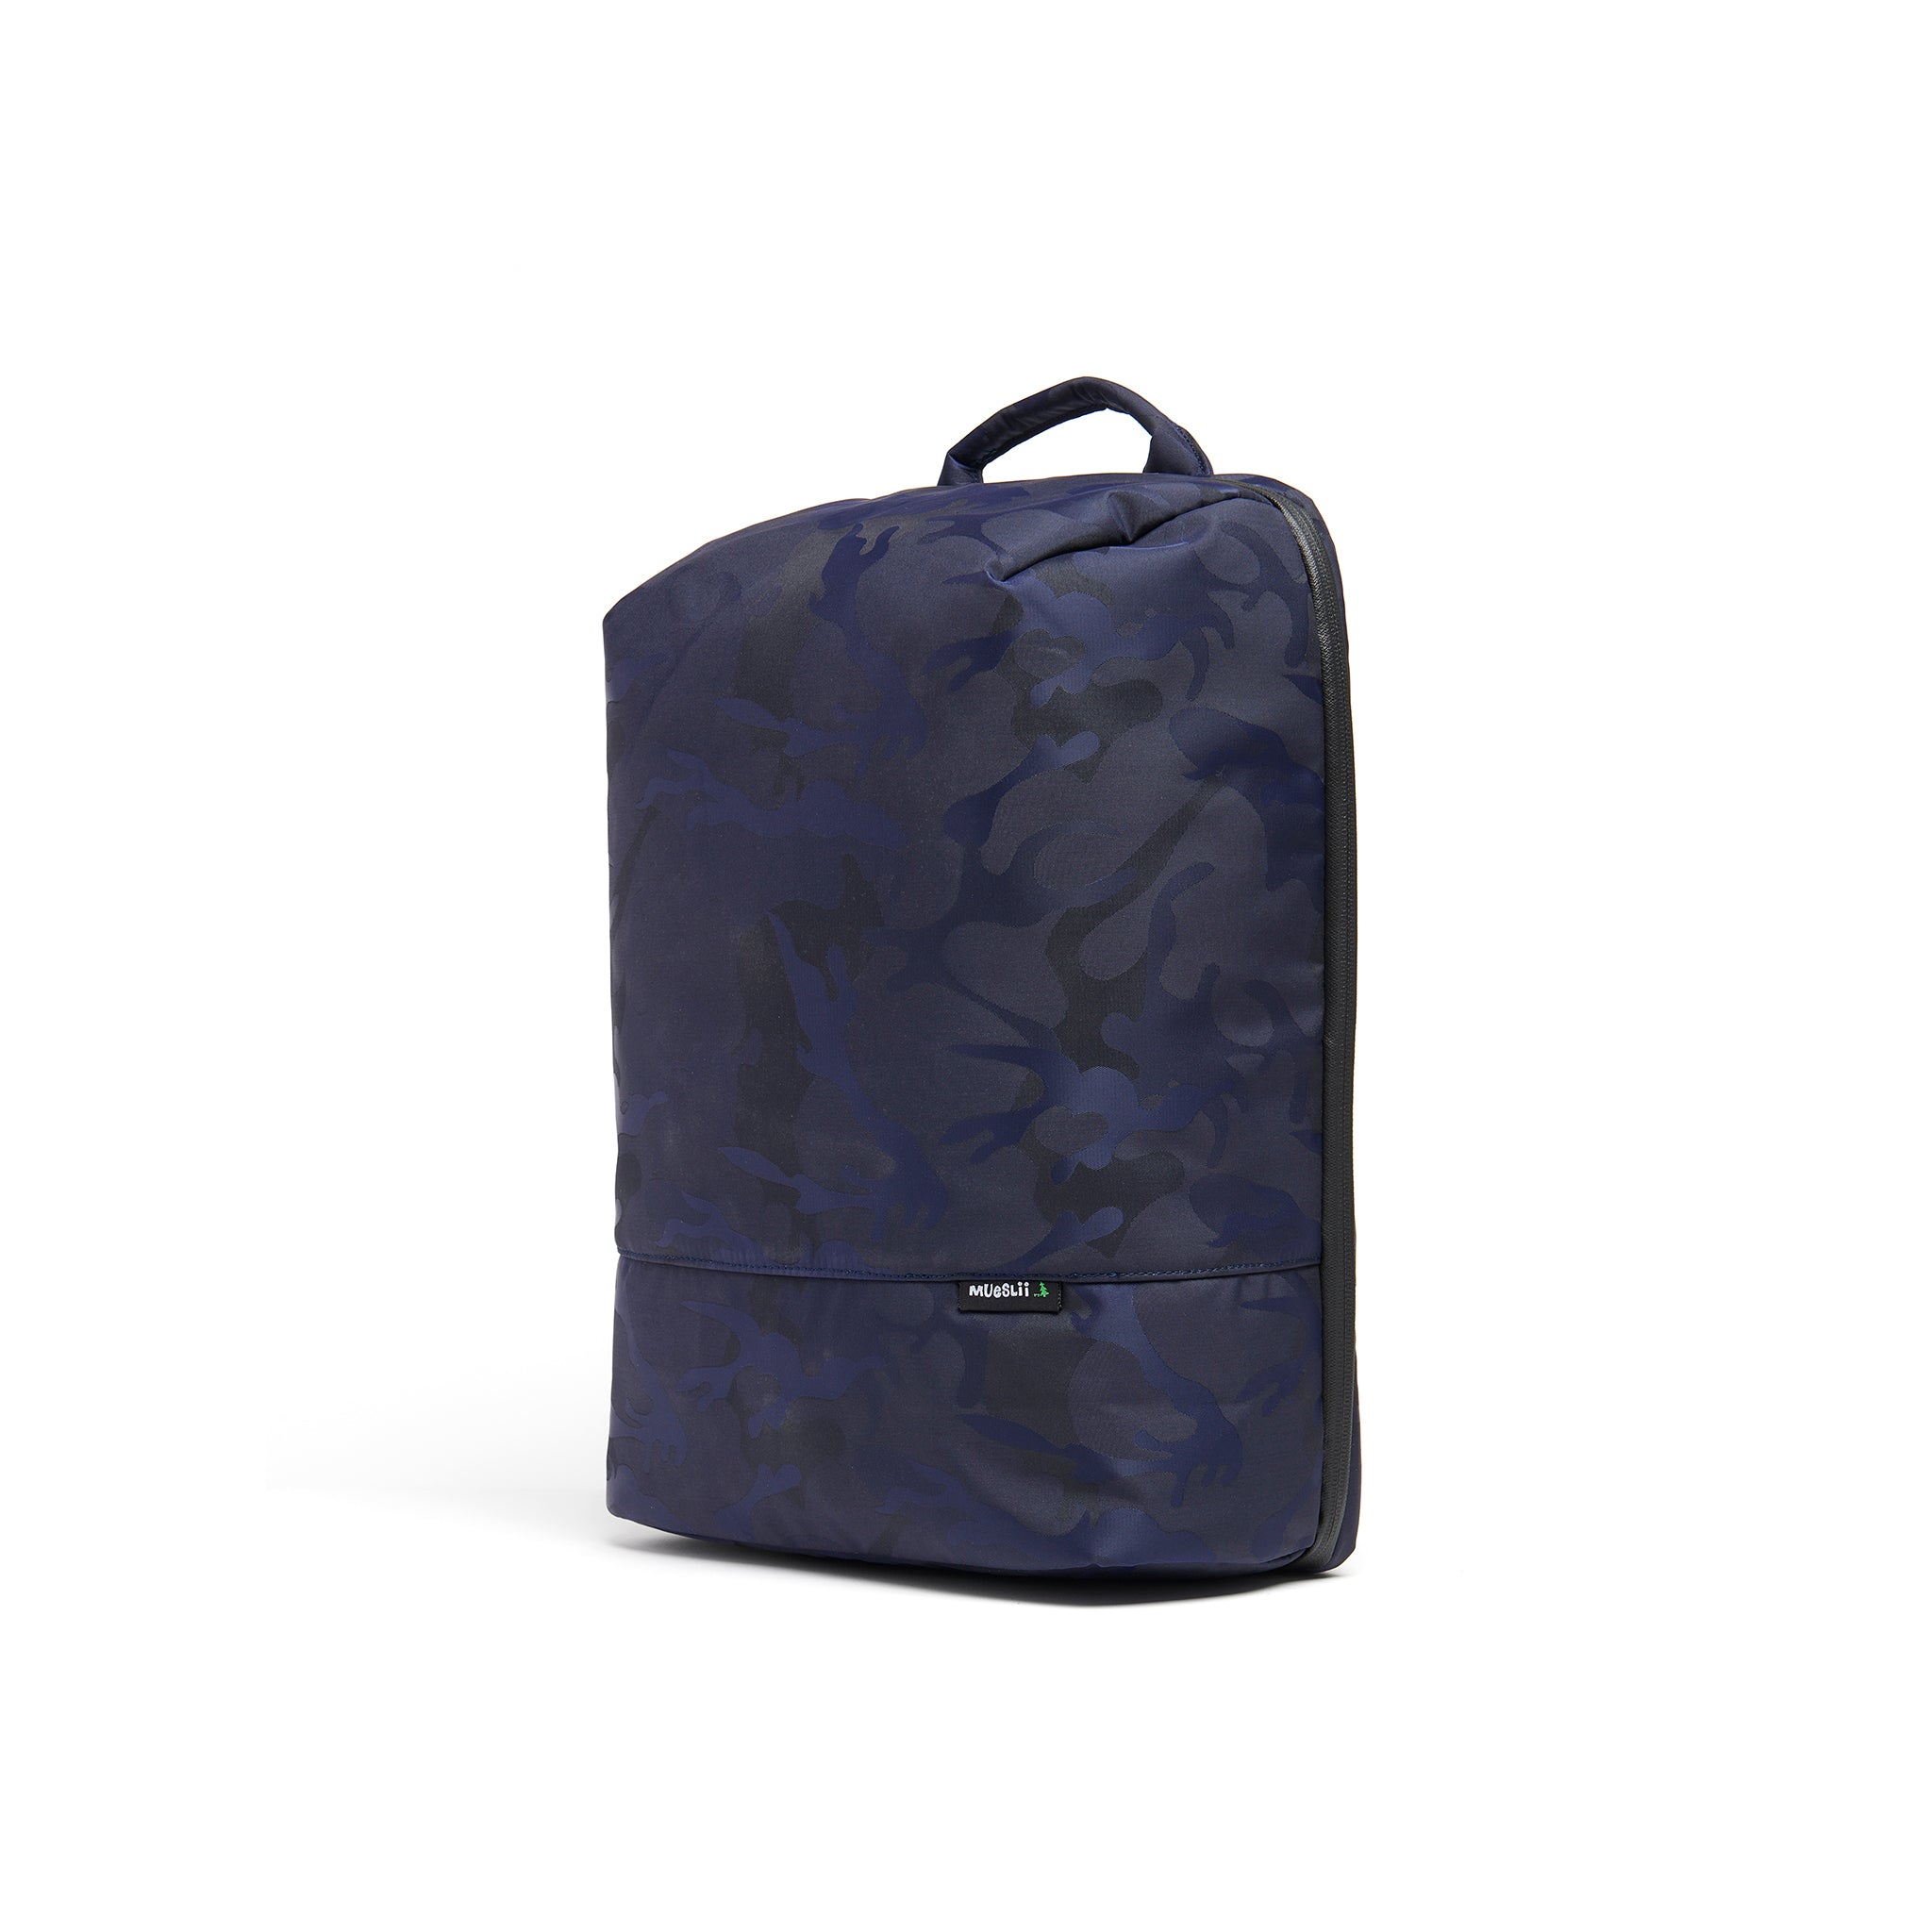 Mueslii travel backpack, made of waterproof jacquard nylon, camouflage pattern, with a laptop compartment, color blue, side view.